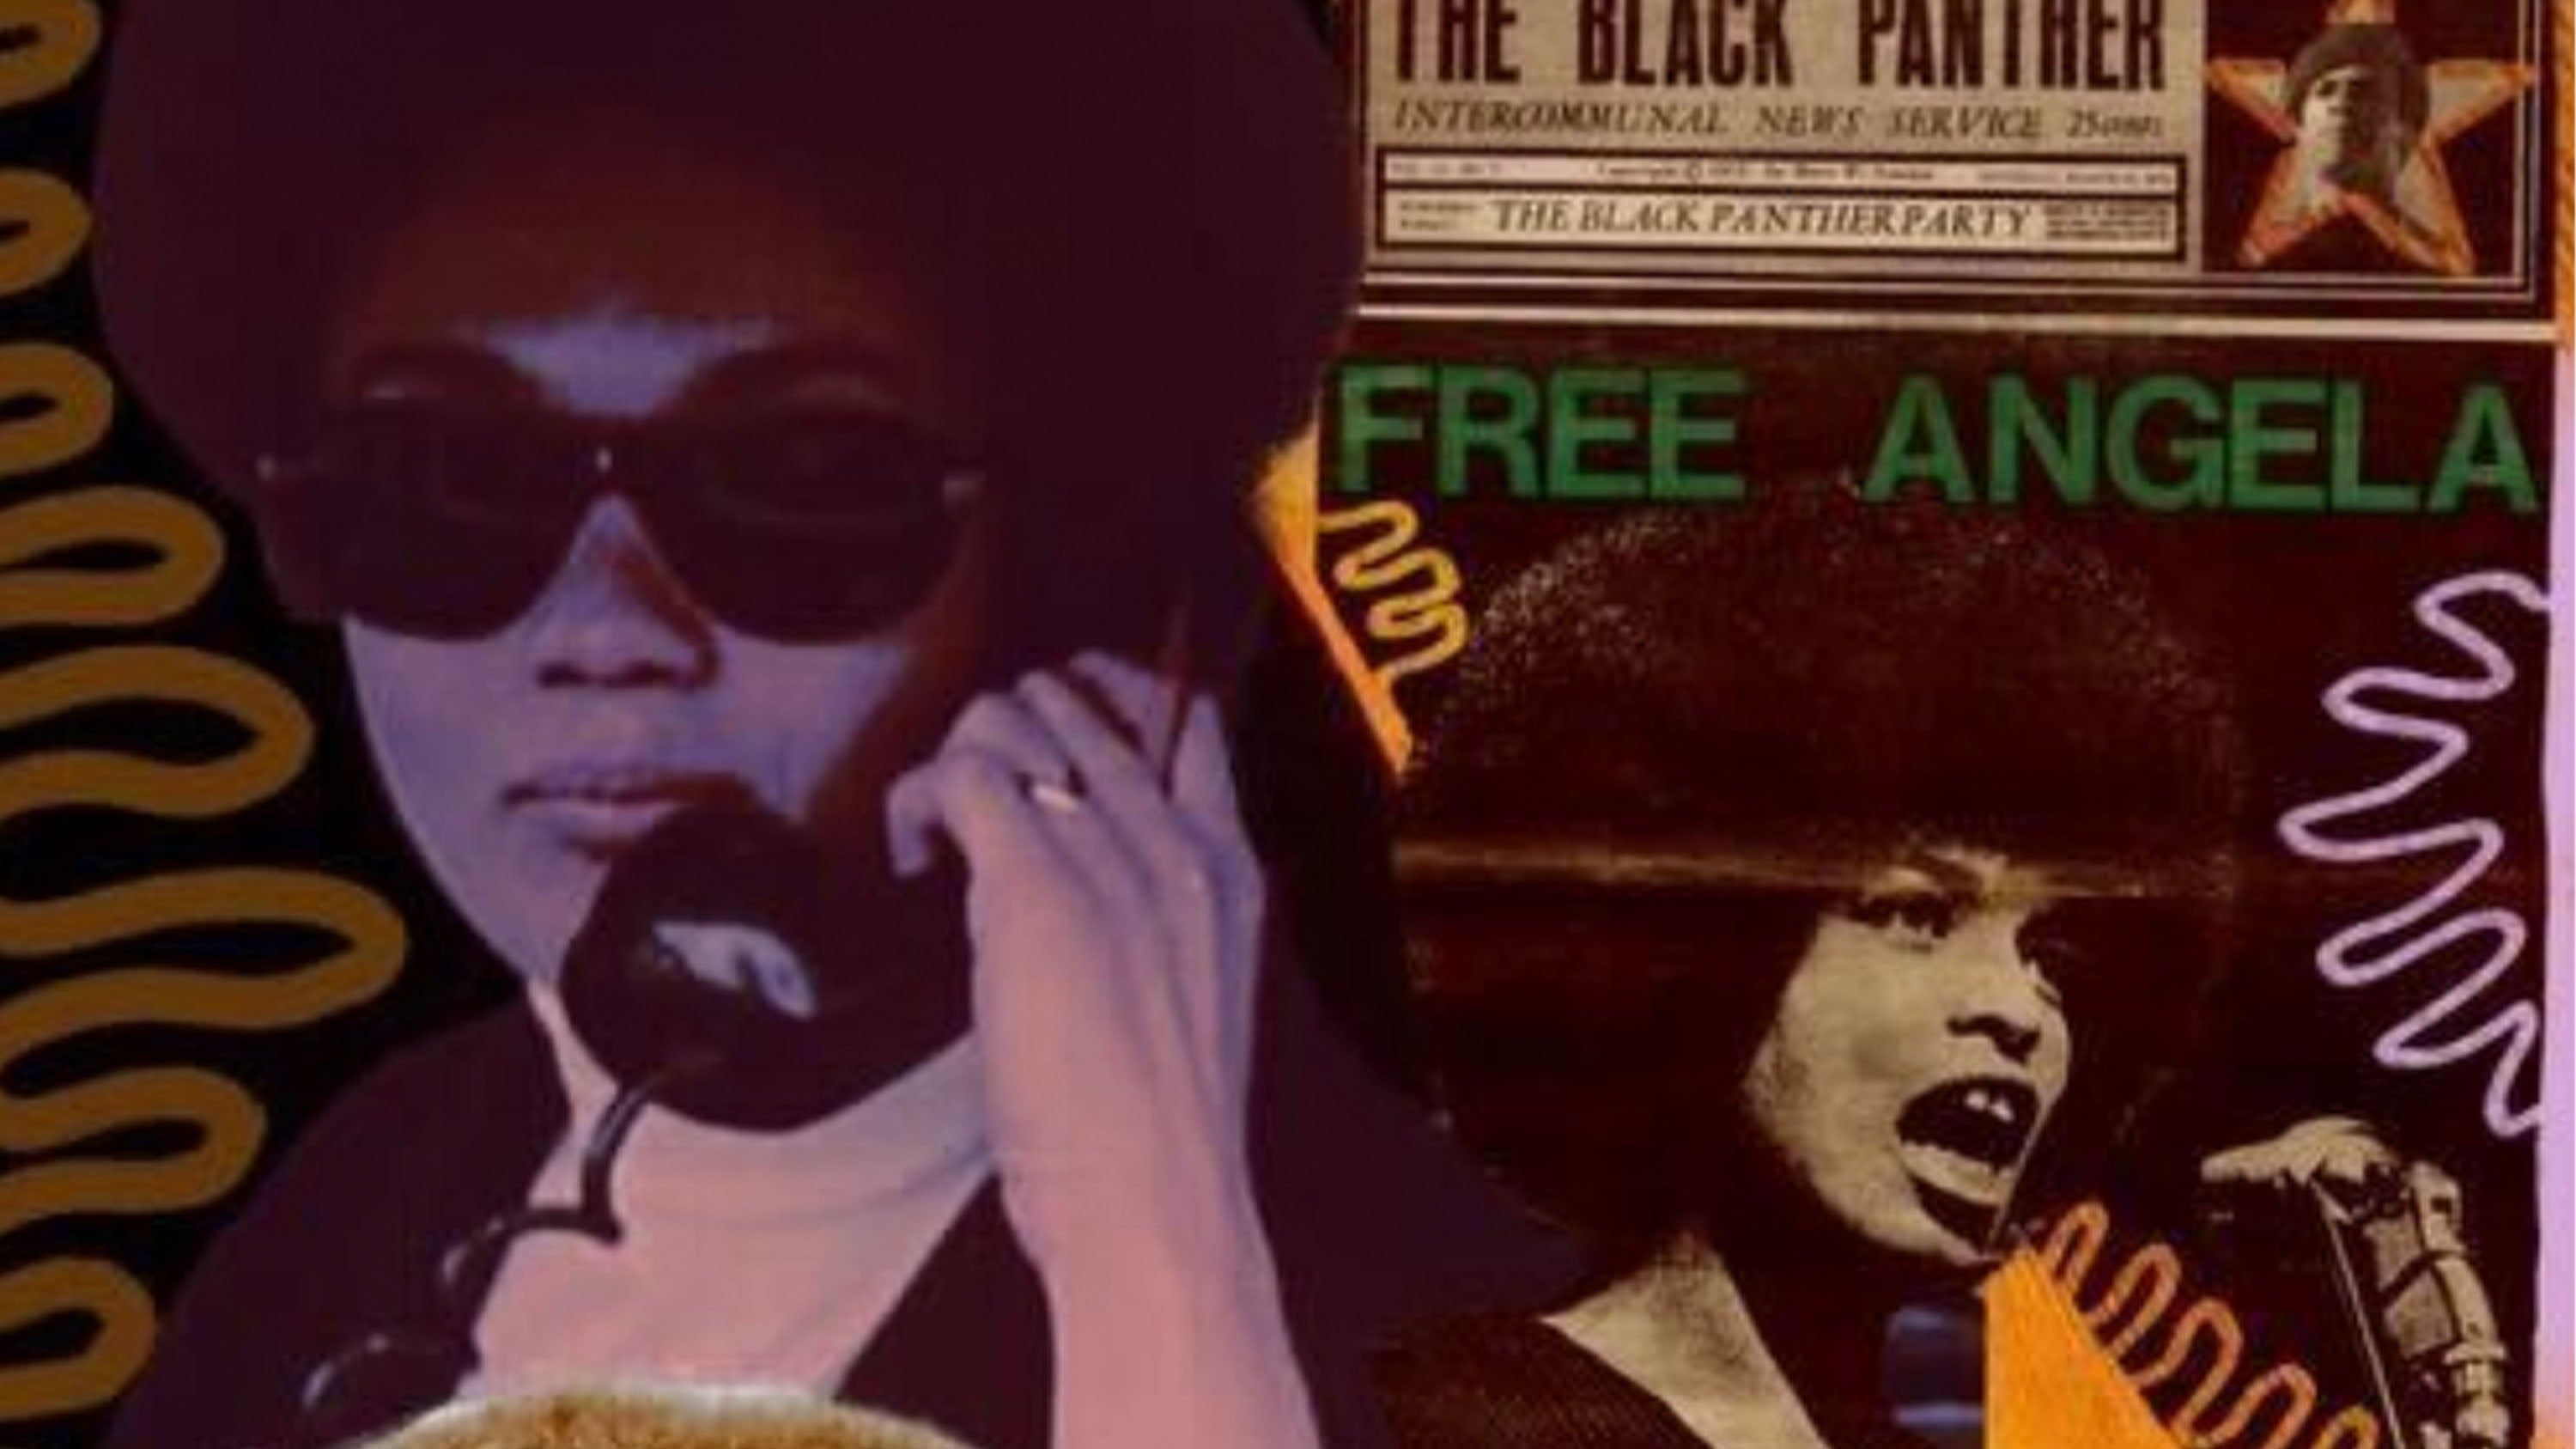 A Revolutionary: An Ode to Black History by Jasmyn Brown